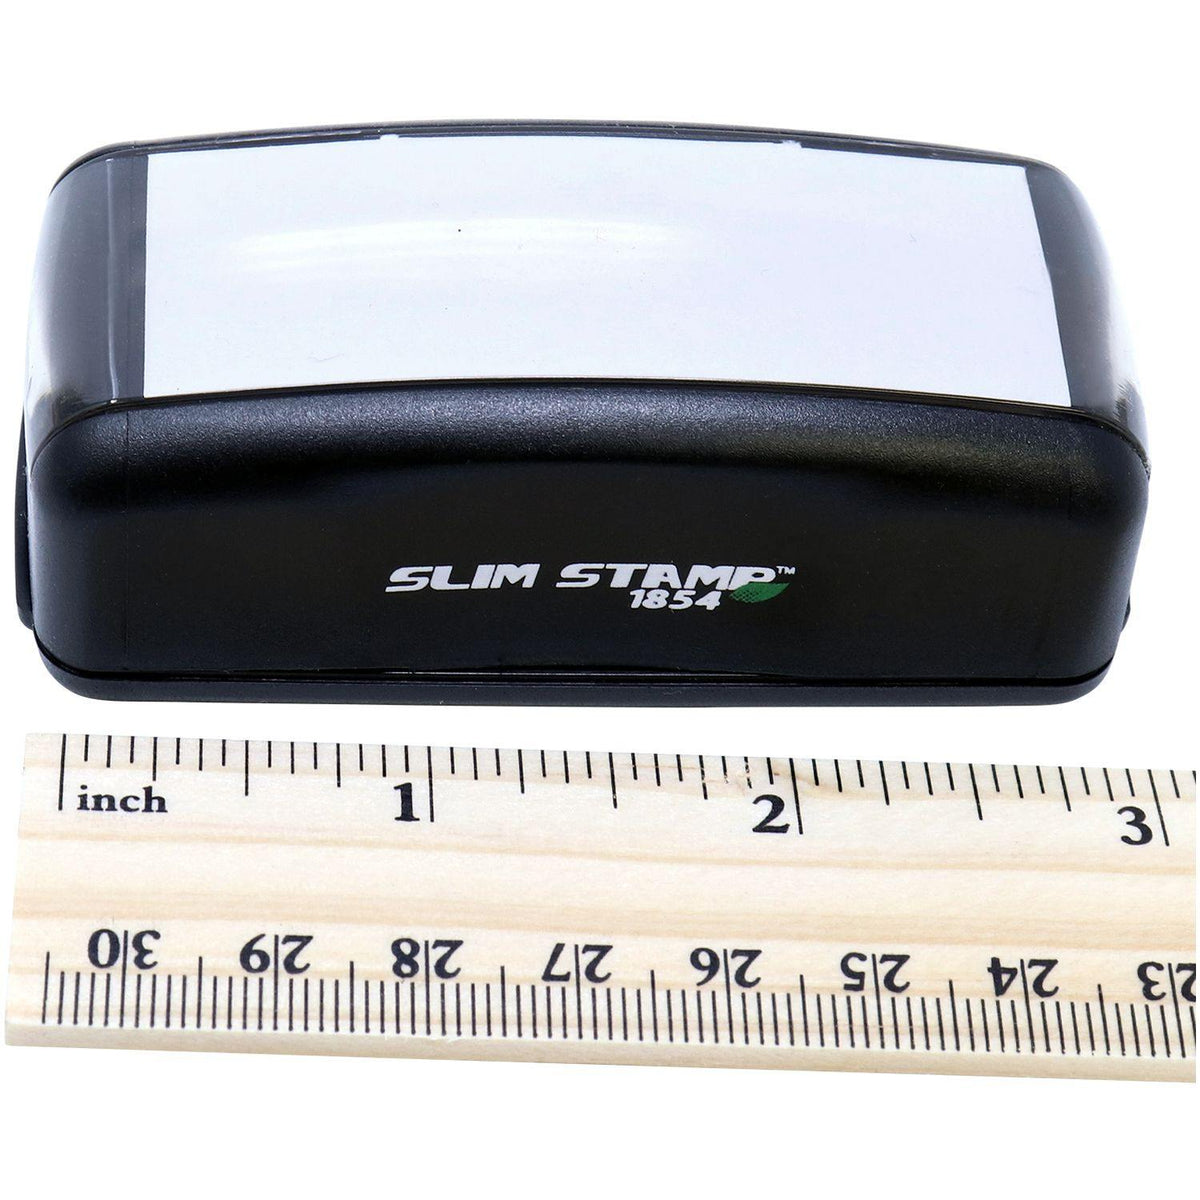 Measurement Large Pre-Inked Outline Paid Stamp with Ruler